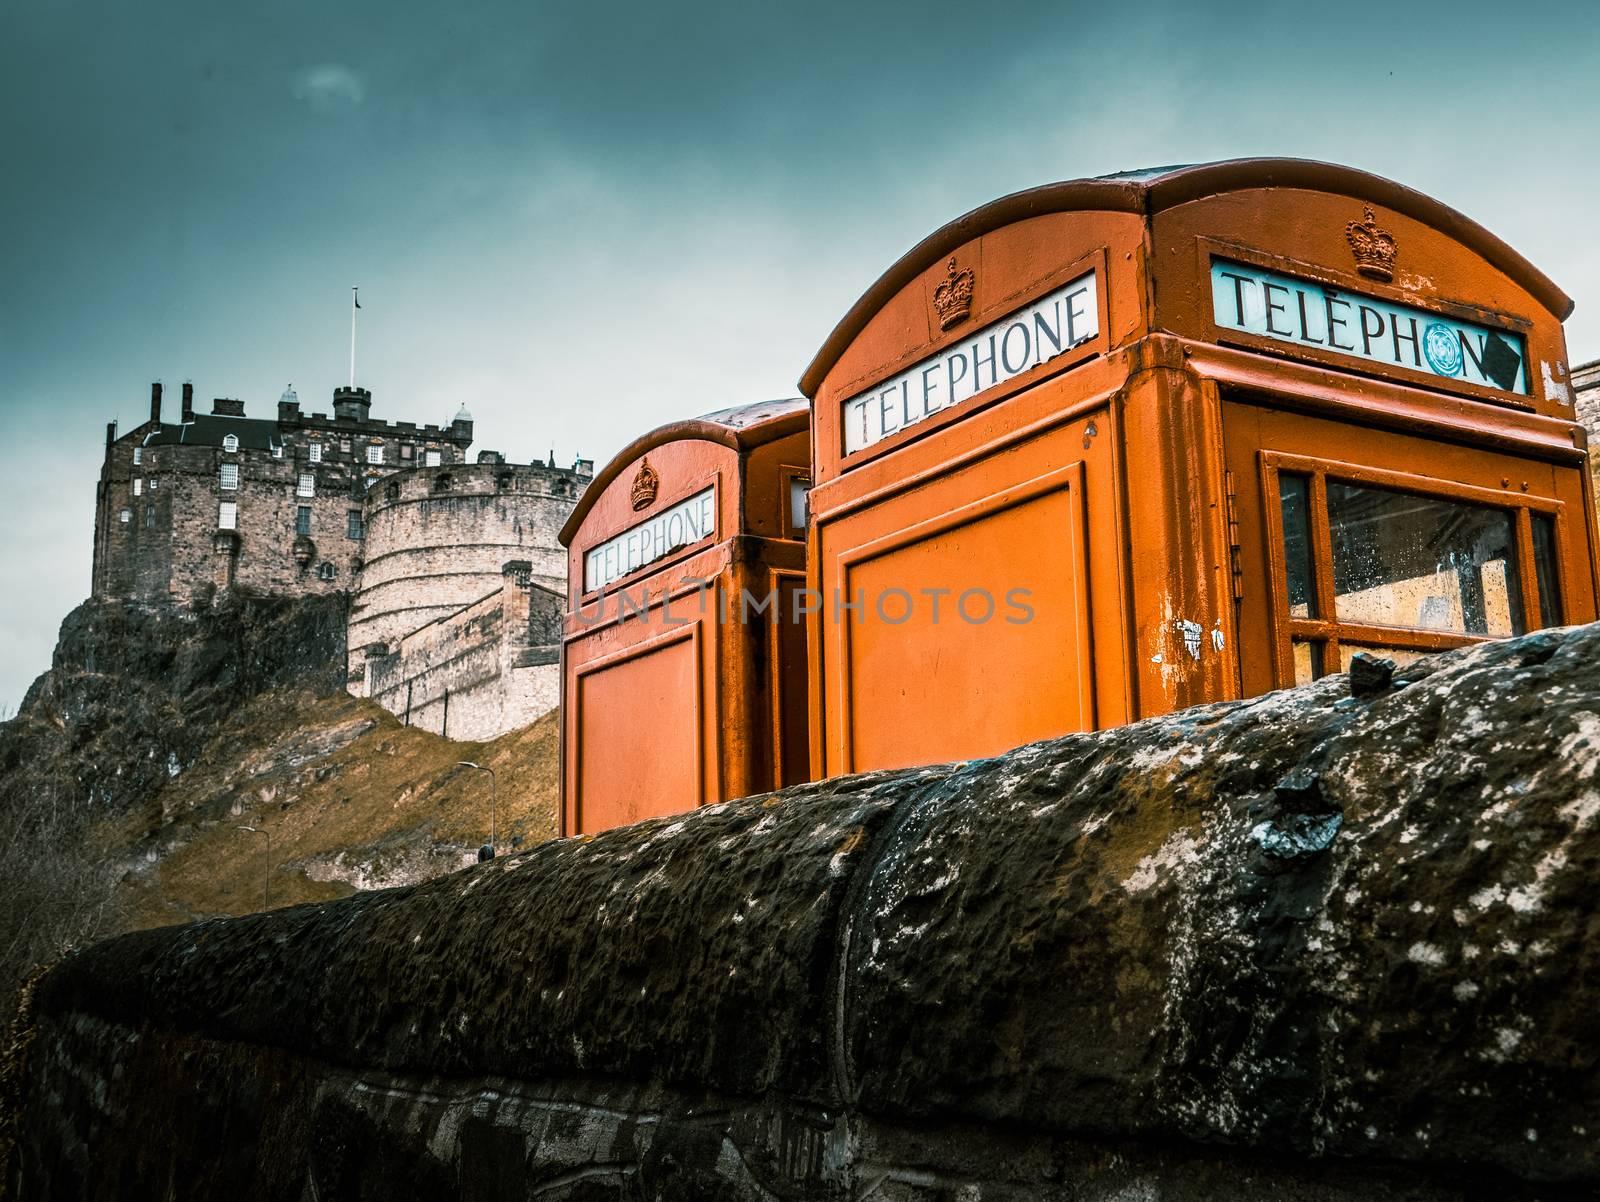 Red Phoneboxes By Edinburgh Castle by mrdoomits